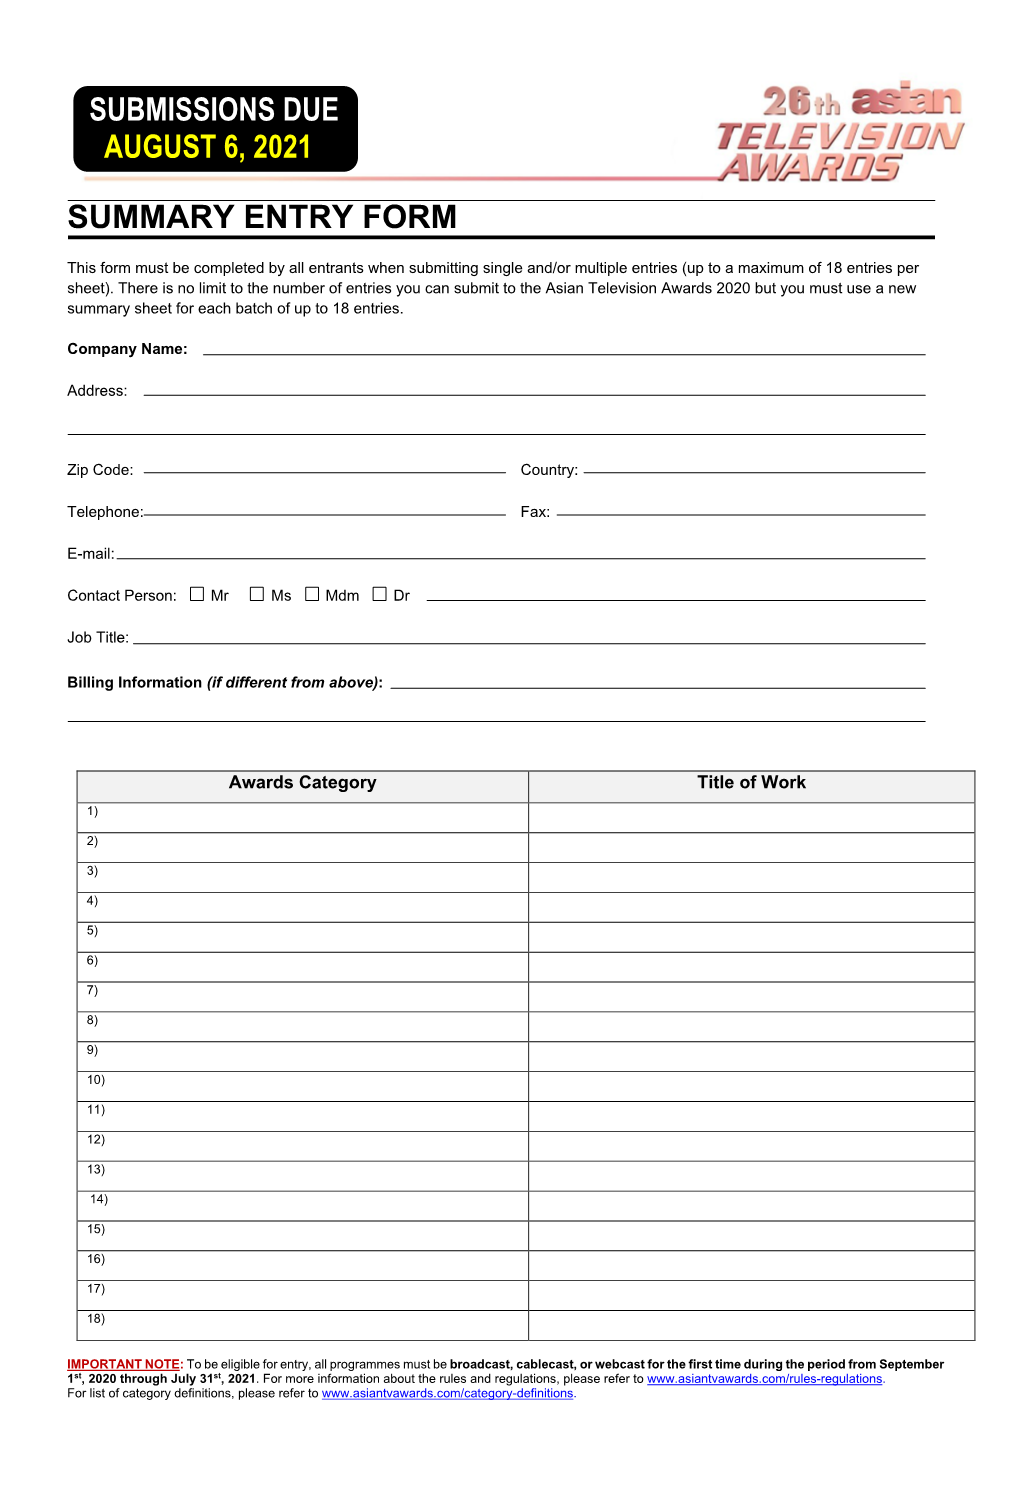 Download ATA 2021 Summary Entry Form In